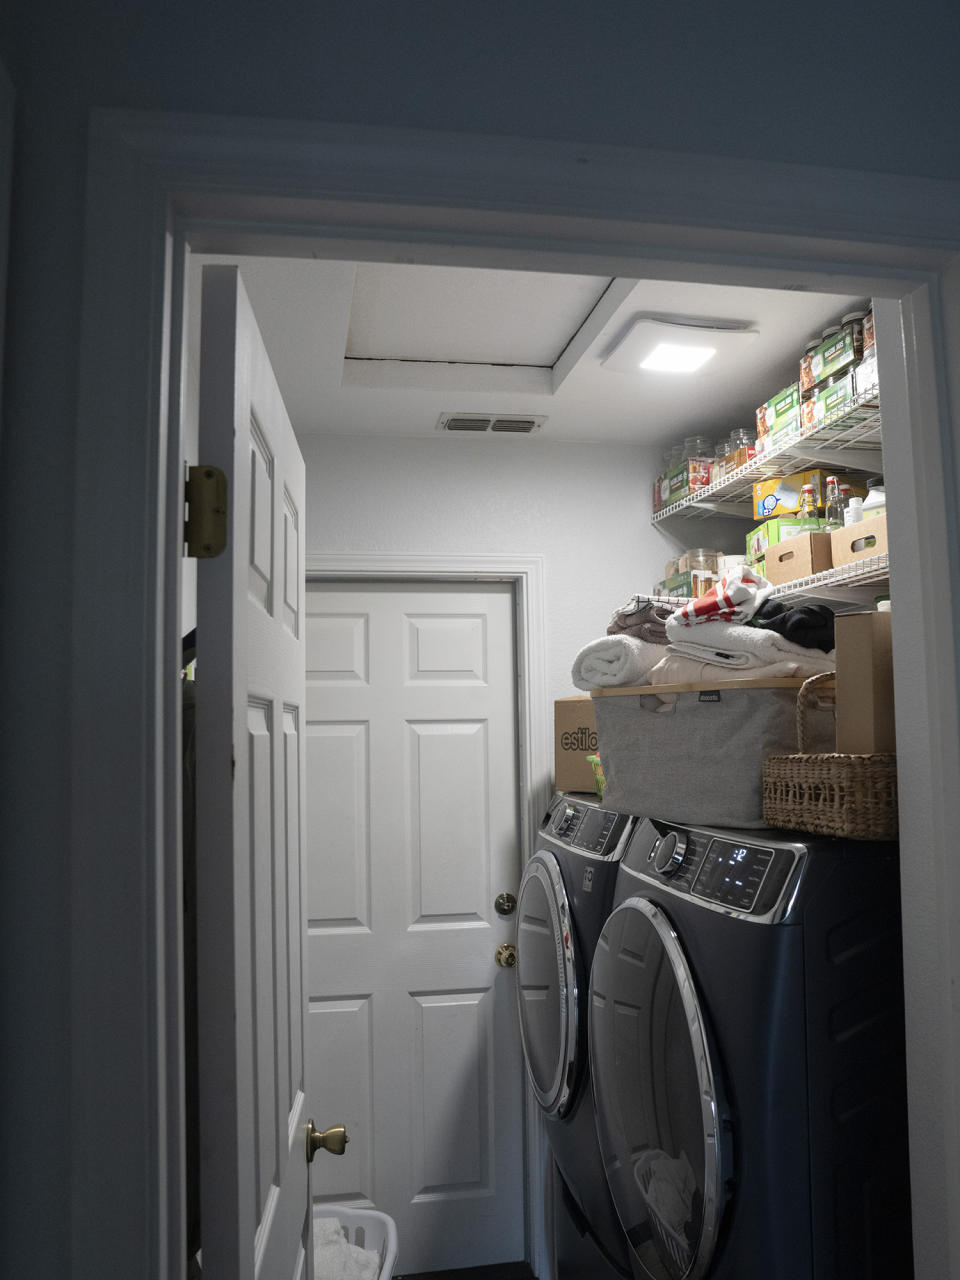 Franzen and Crenshaw’s laundry room. (Chloe Aftel for The Washington Post)